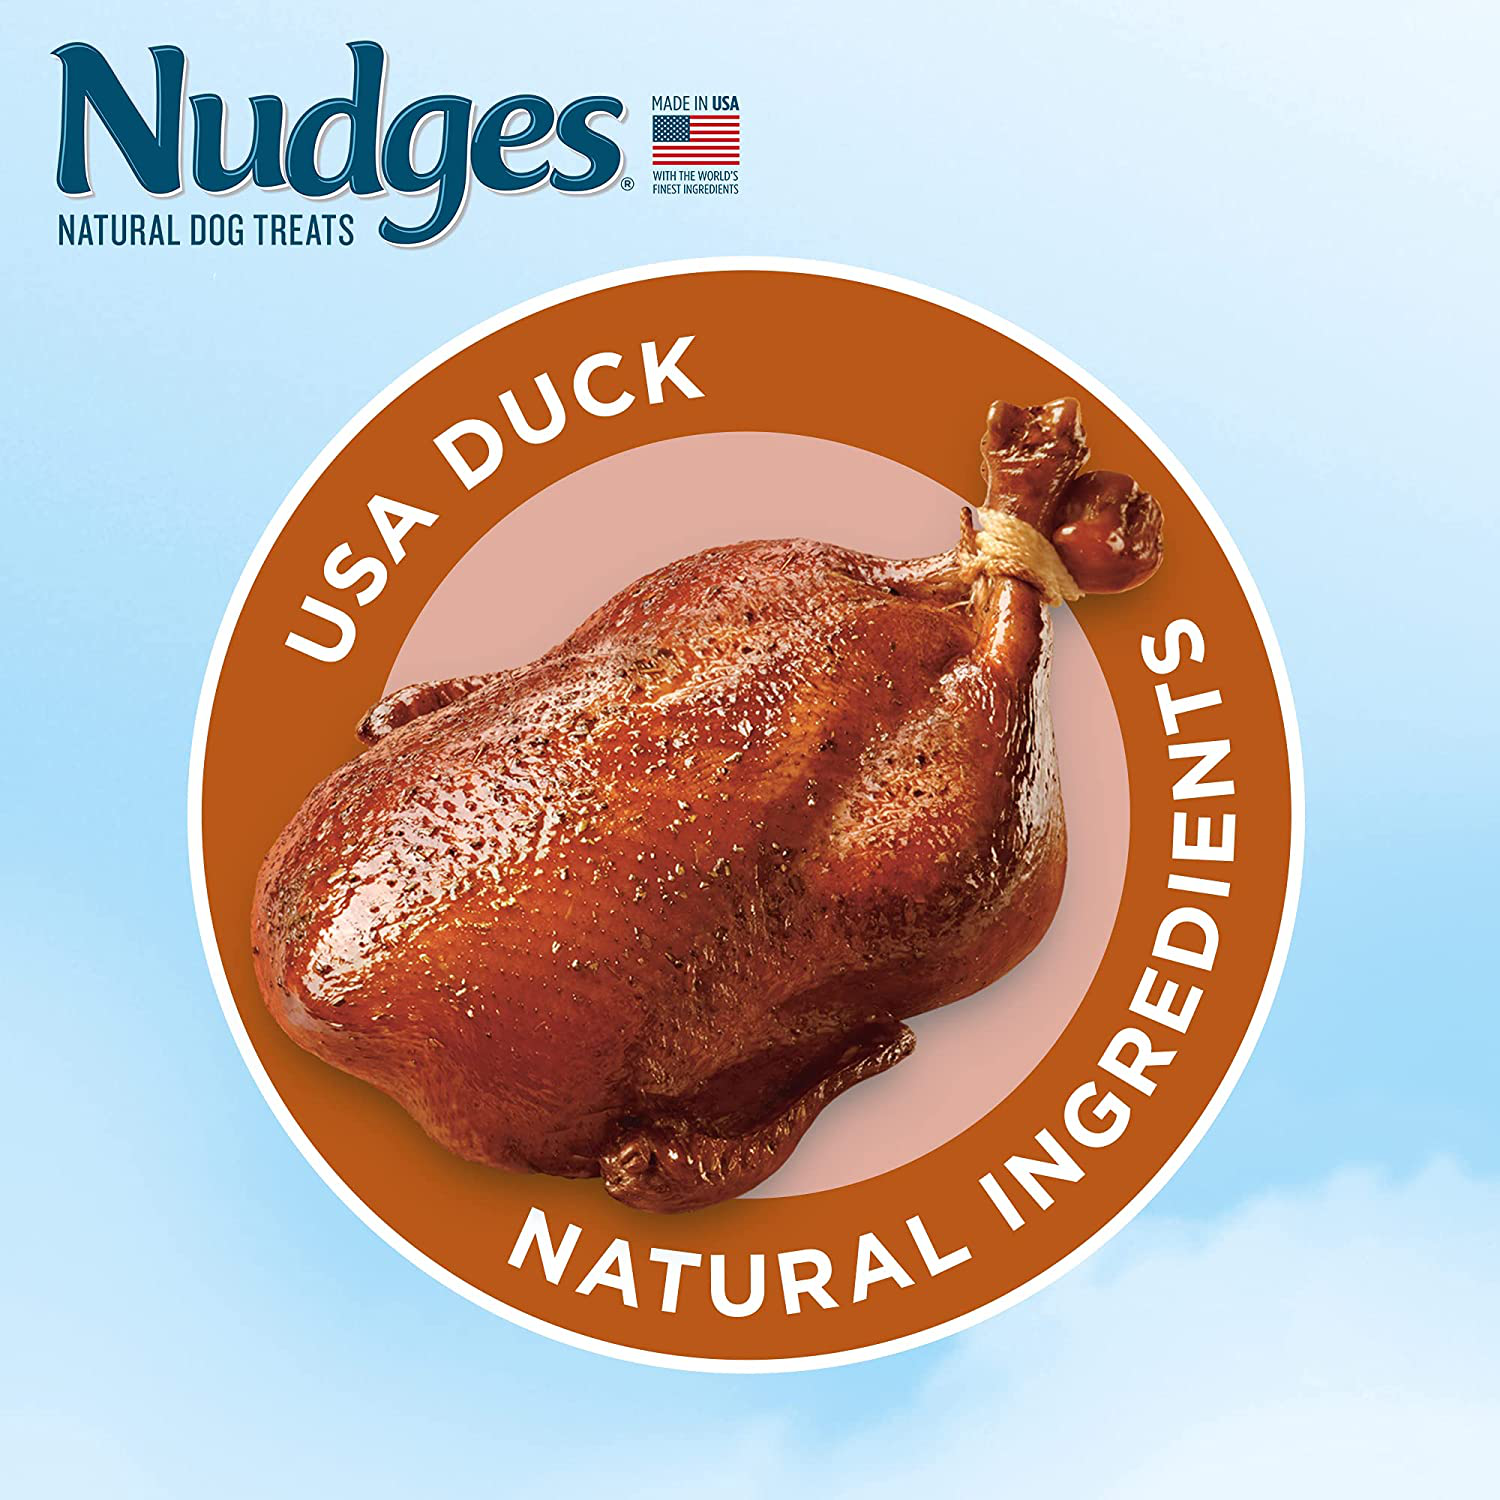 Nudges Natural Dog Treats Jerky Cuts Made with Real Duck Animals & Pet Supplies > Pet Supplies > Dog Supplies > Dog Treats Nudges   